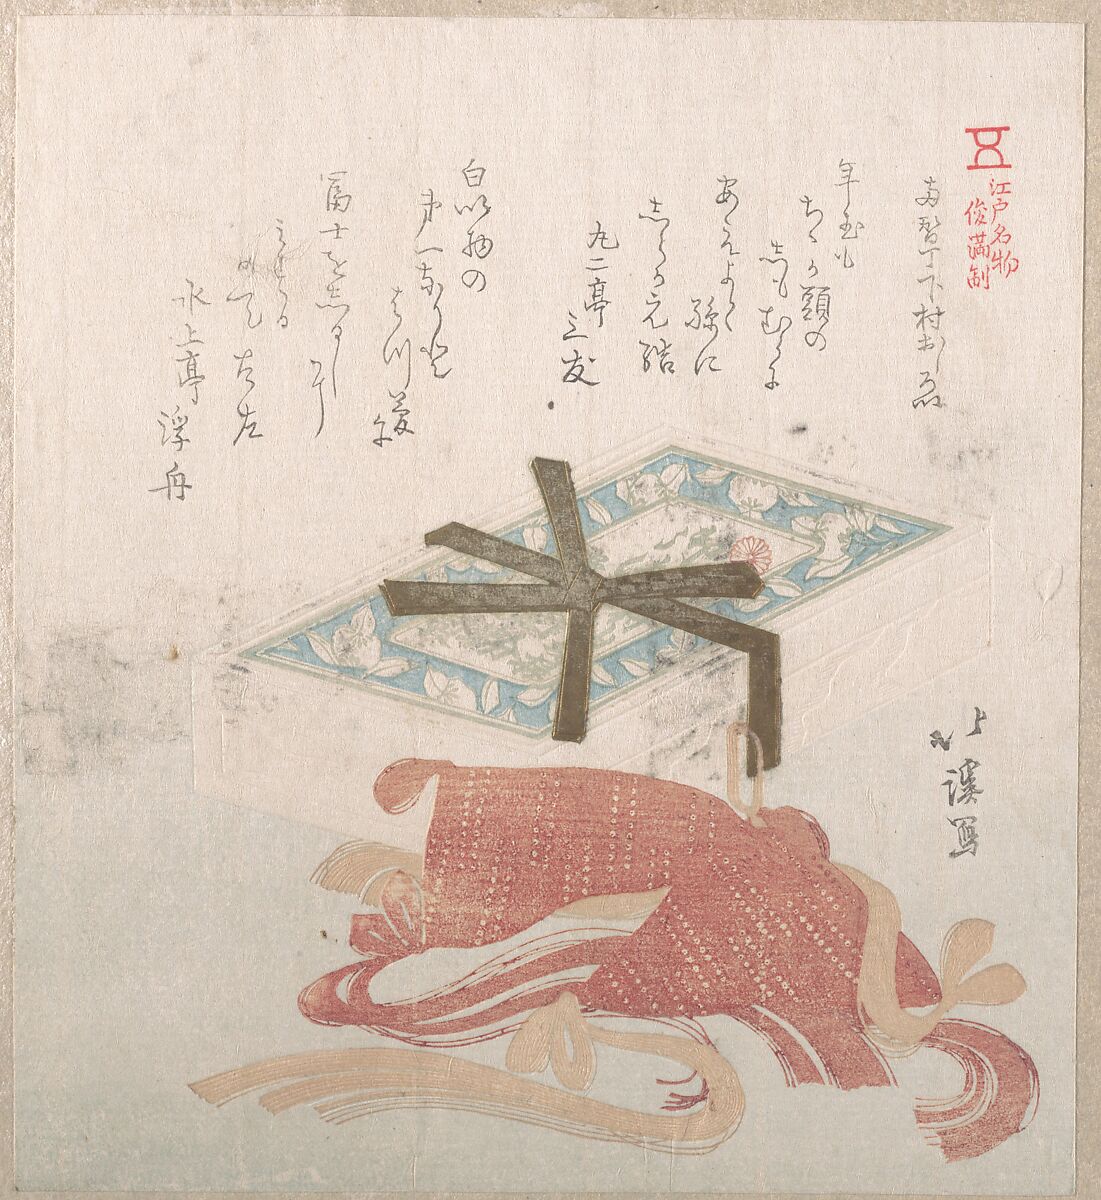 Box of Face Powder and Hair Ties; Specialities of Shimomura in Ryogaecho, Totoya Hokkei (Japanese, 1780–1850), Part of an album of woodblock prints (surimono); ink and color on paper, Japan 